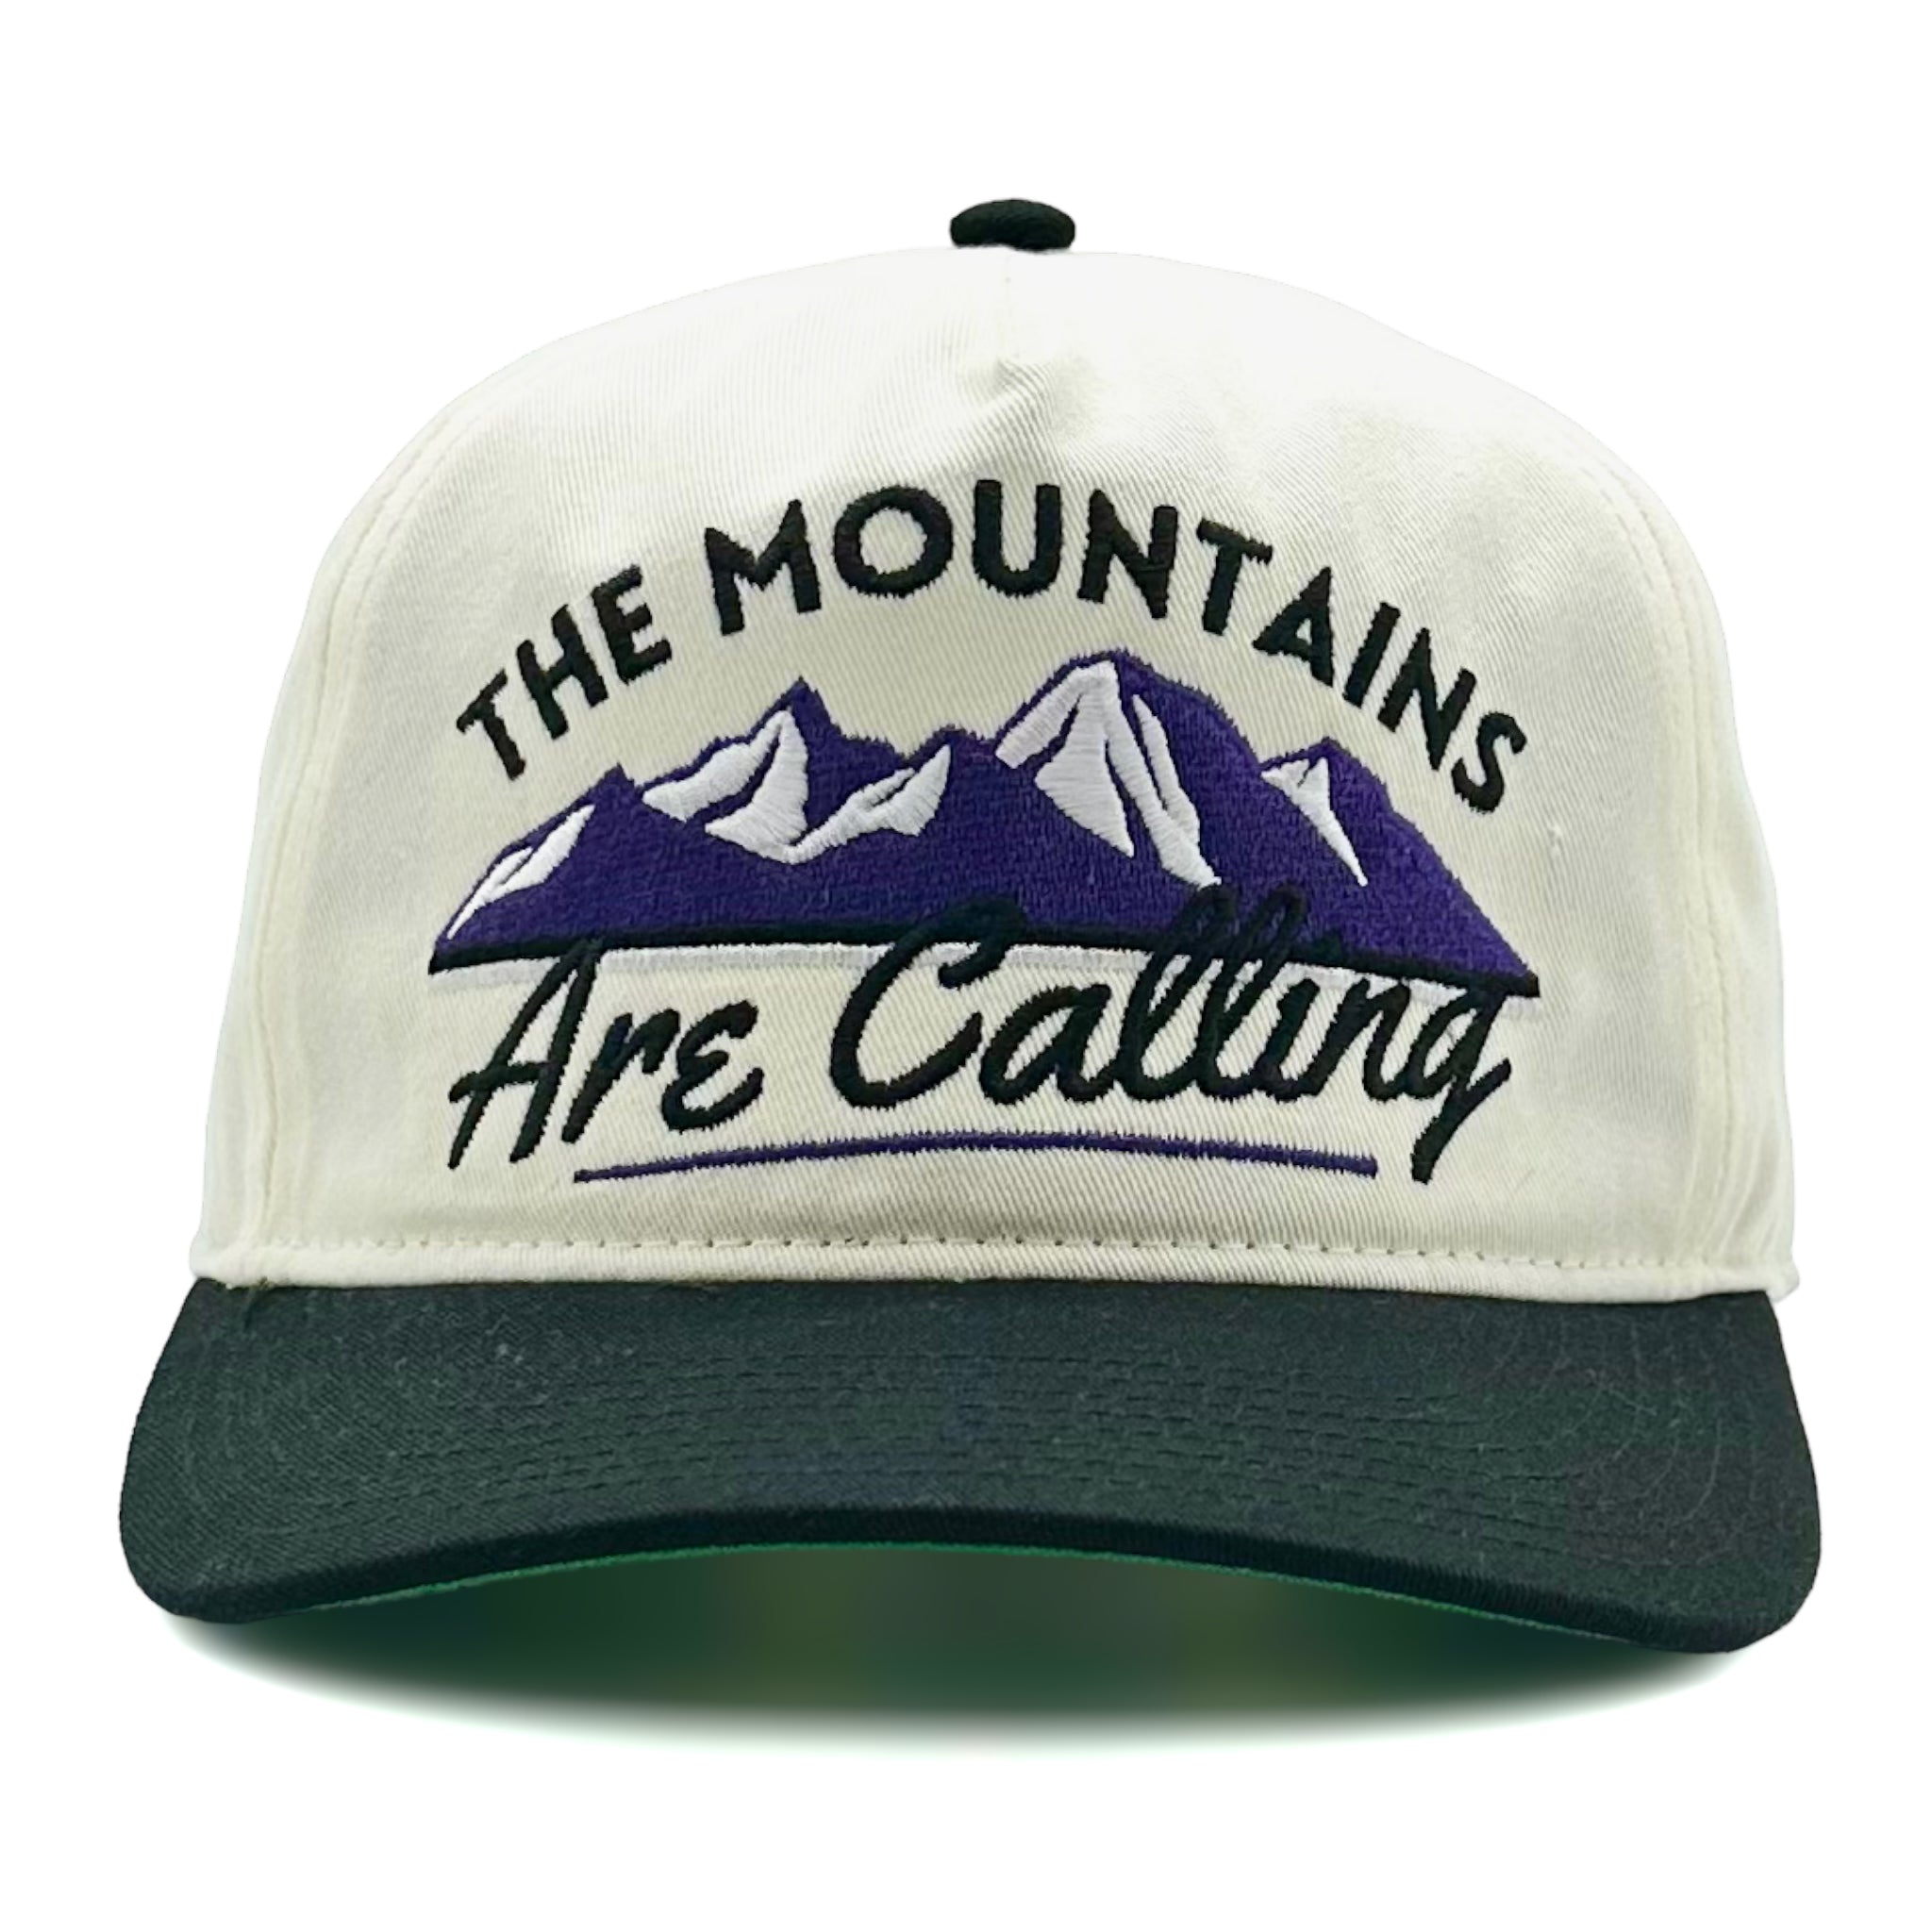 Rare Vintage 90s Snapbacks | The Mountains Are Calling Hat